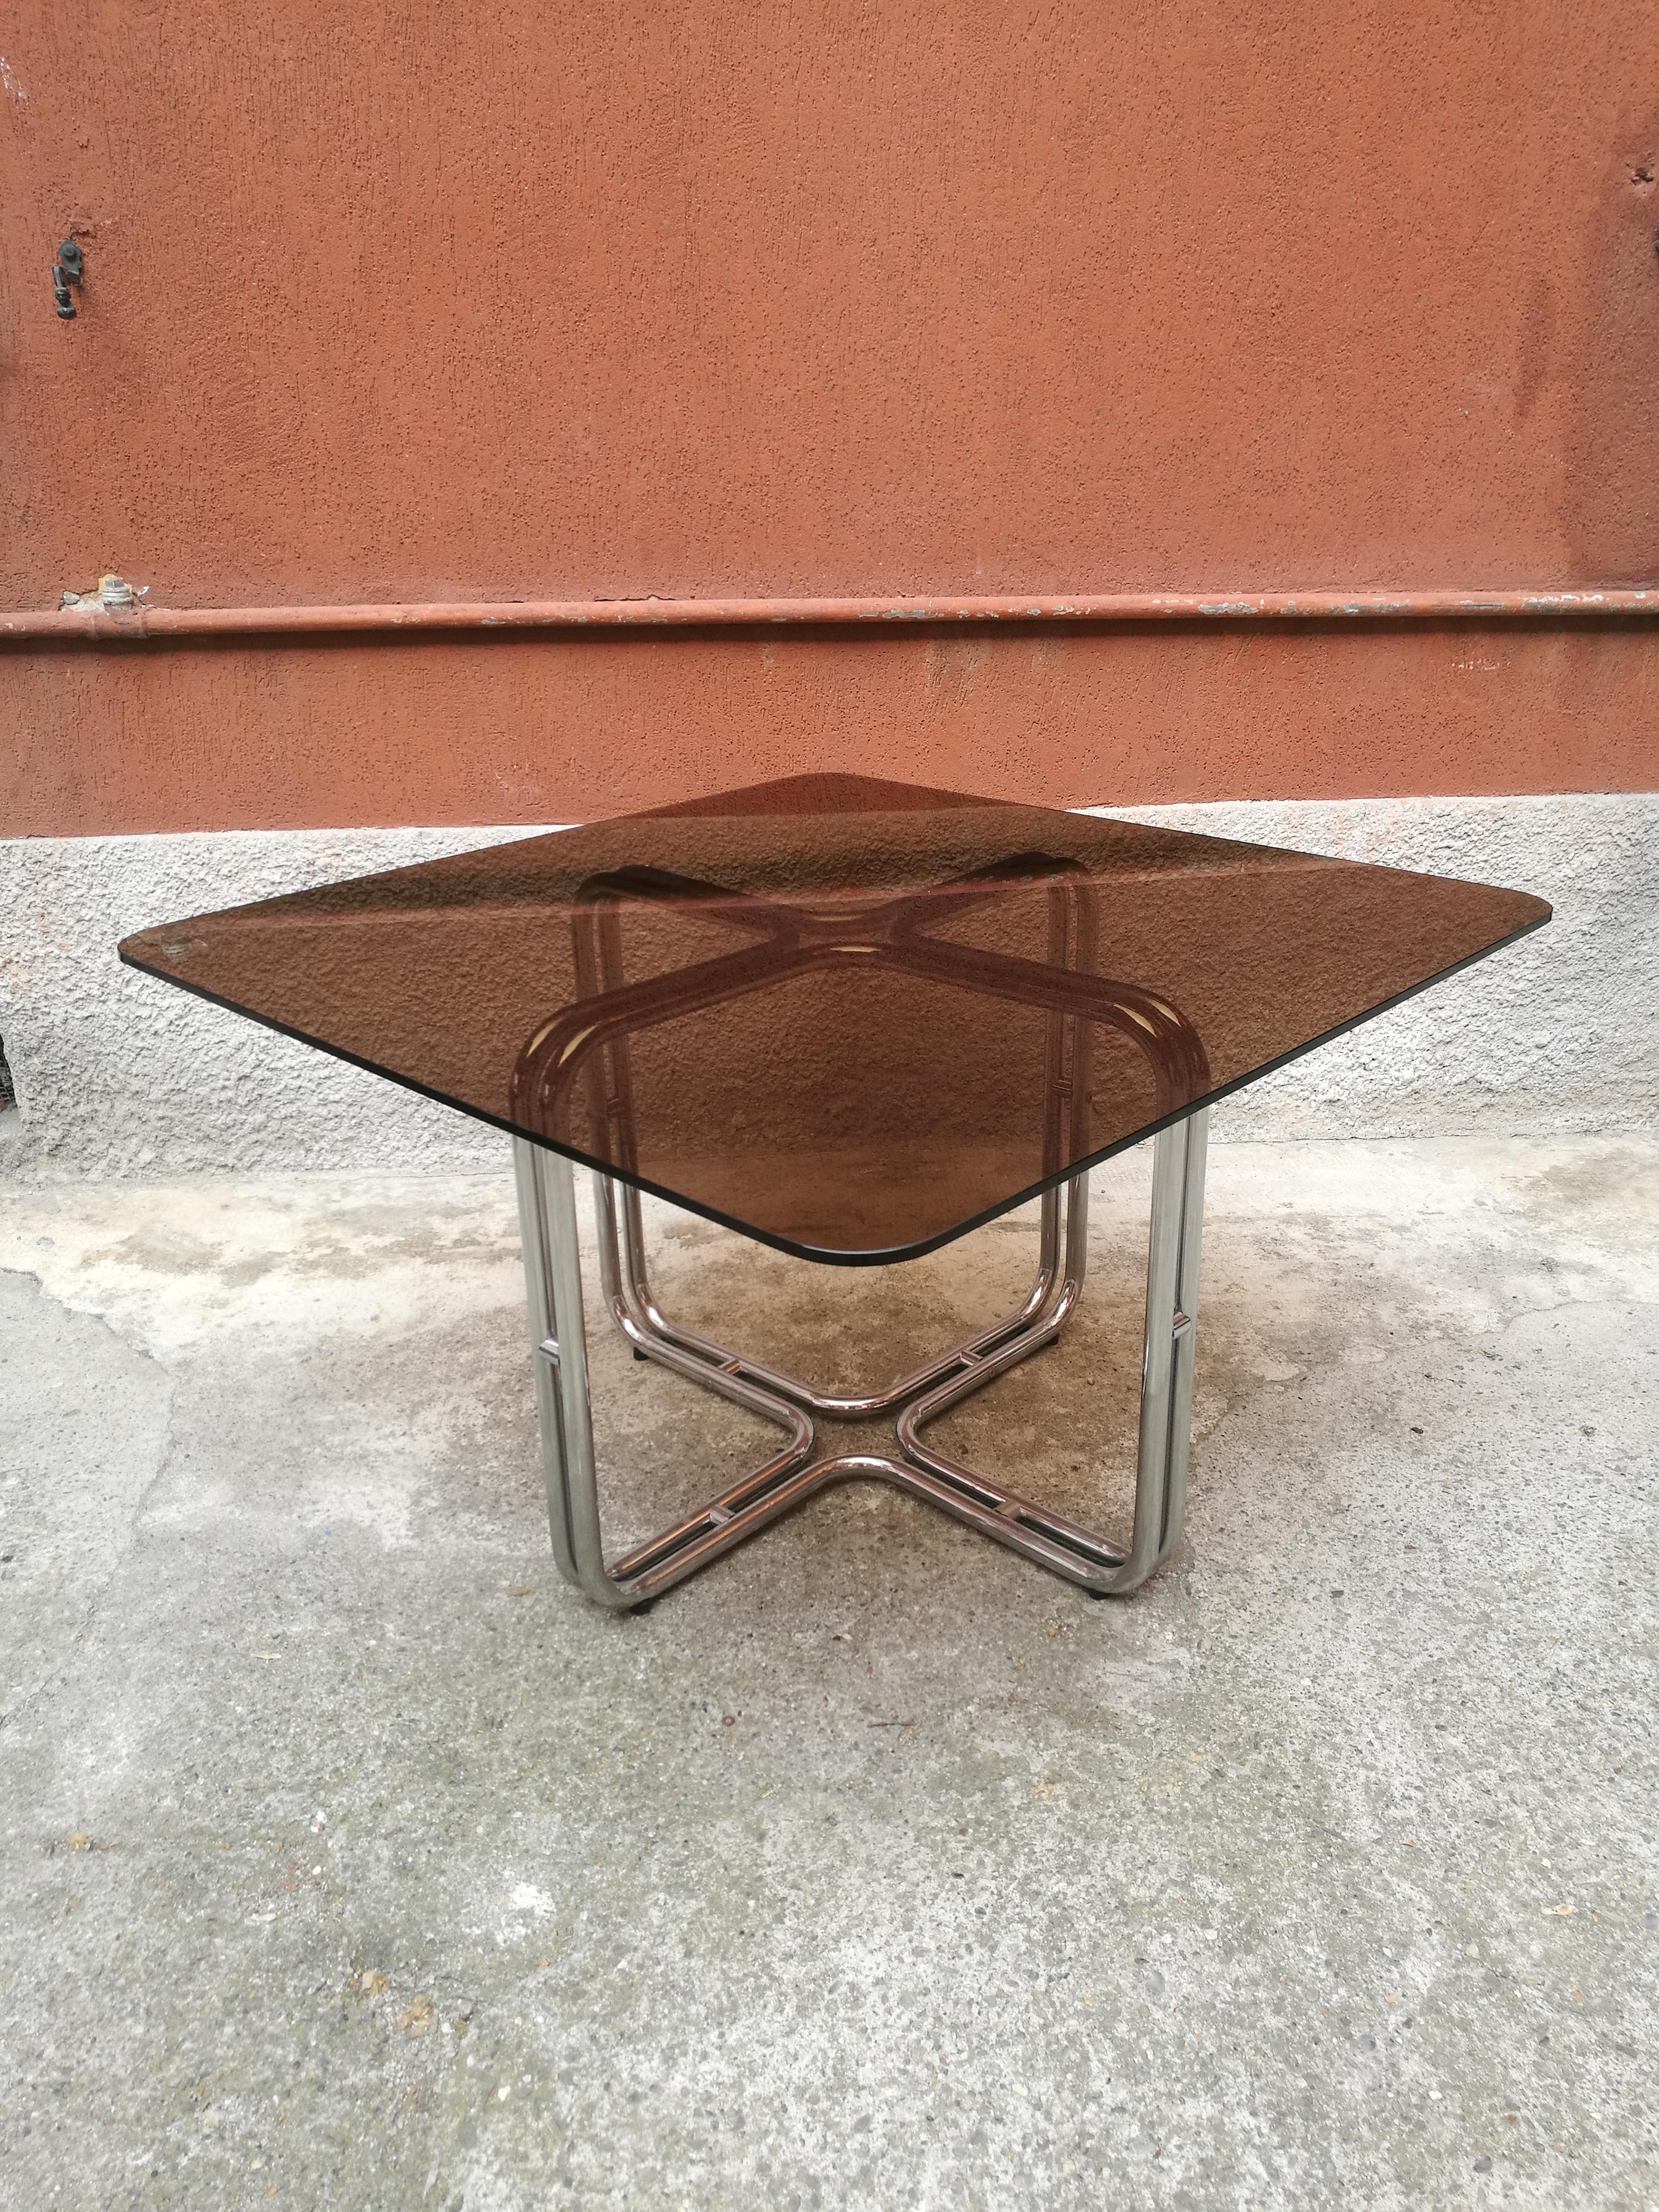 Mid-Century Modern Dining Table with Smoky Glass Top and Chromed Metal Structure from 1970s